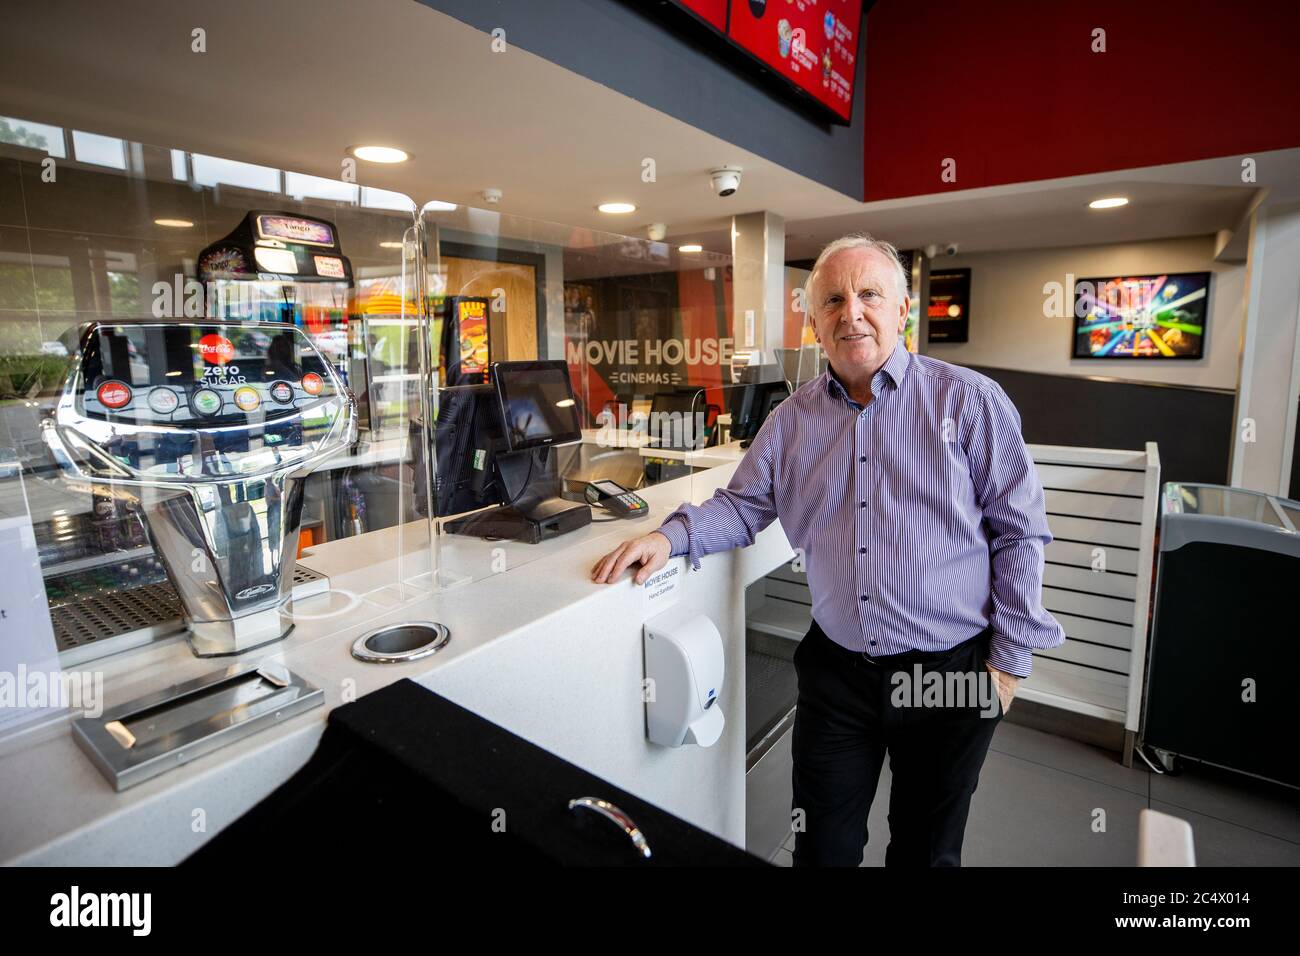 Michael McAdam, managing director of Movie House Cinemas in Northern Ireland, in his cinema in Glengormley, showing the newly installed screens and guards to protect and reassure staff and customers. Stock Photo